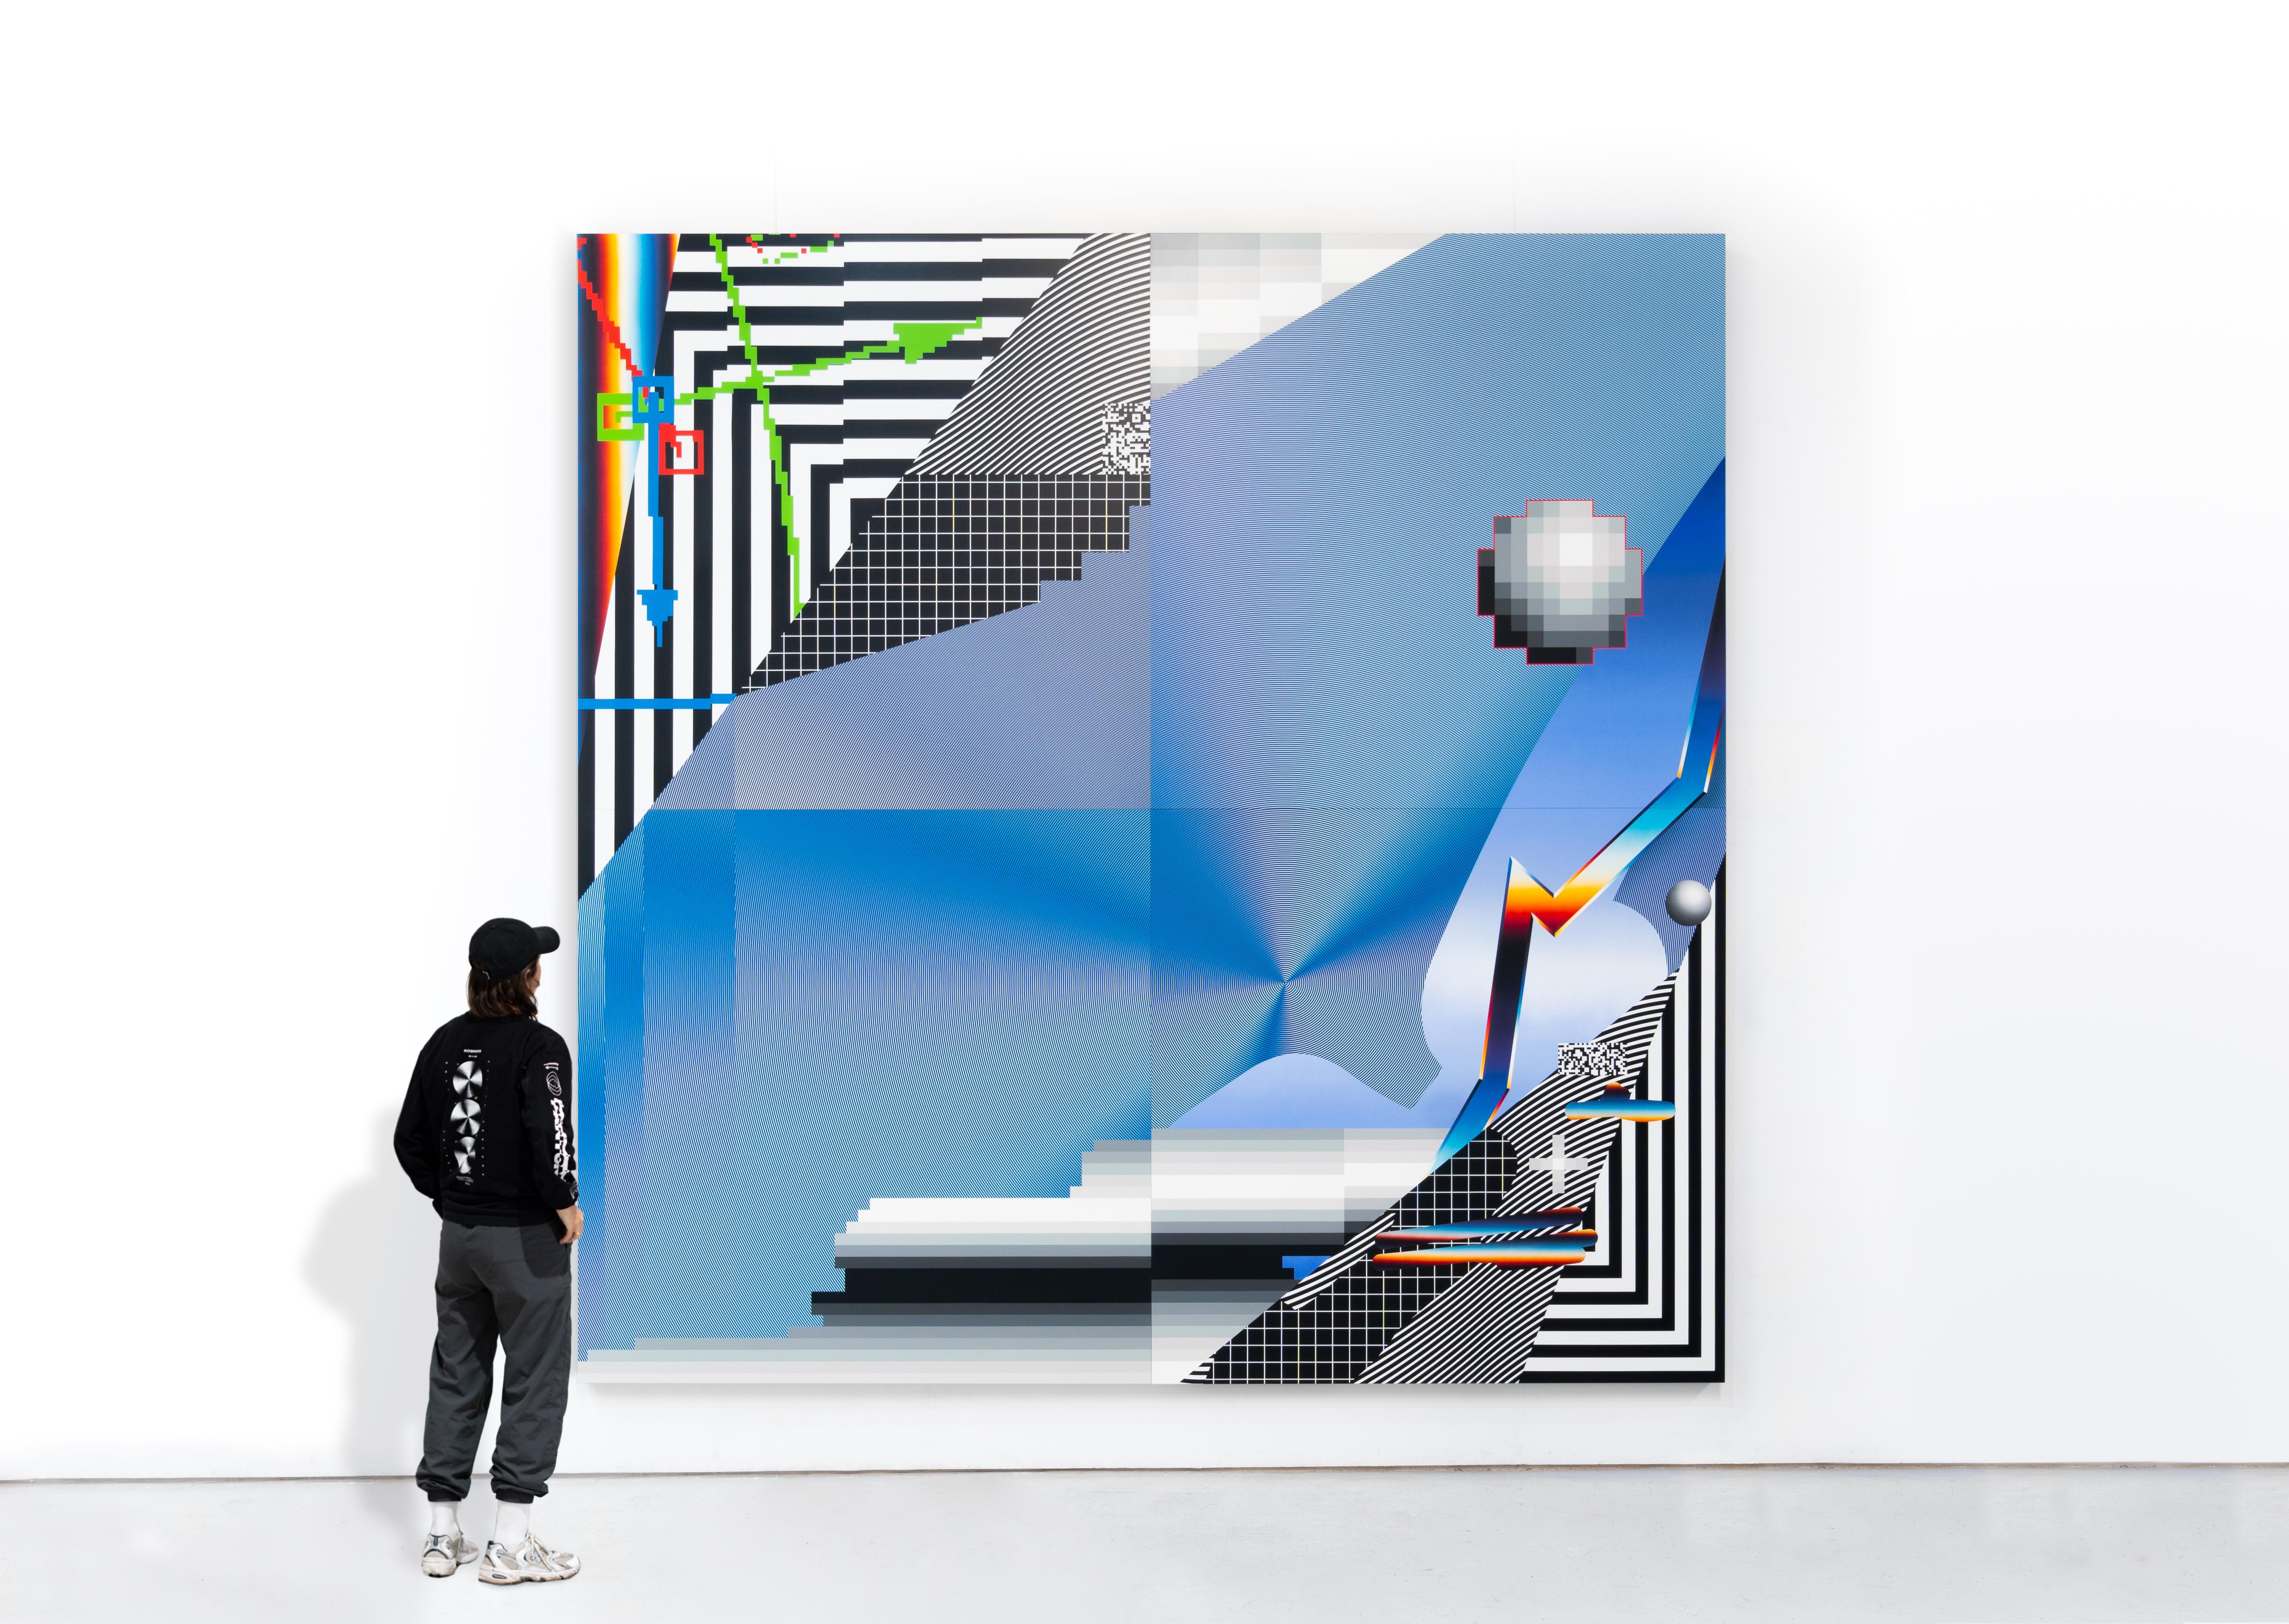 Felipe Pantone is an Argentinian-Spanish artist. He started doing graffiti at the age of 12. He graduated with a Fine Art degree in Valencia (Spain) where his studio is based. Pantone’s work deals with dynamism, transformation, digital revolution,